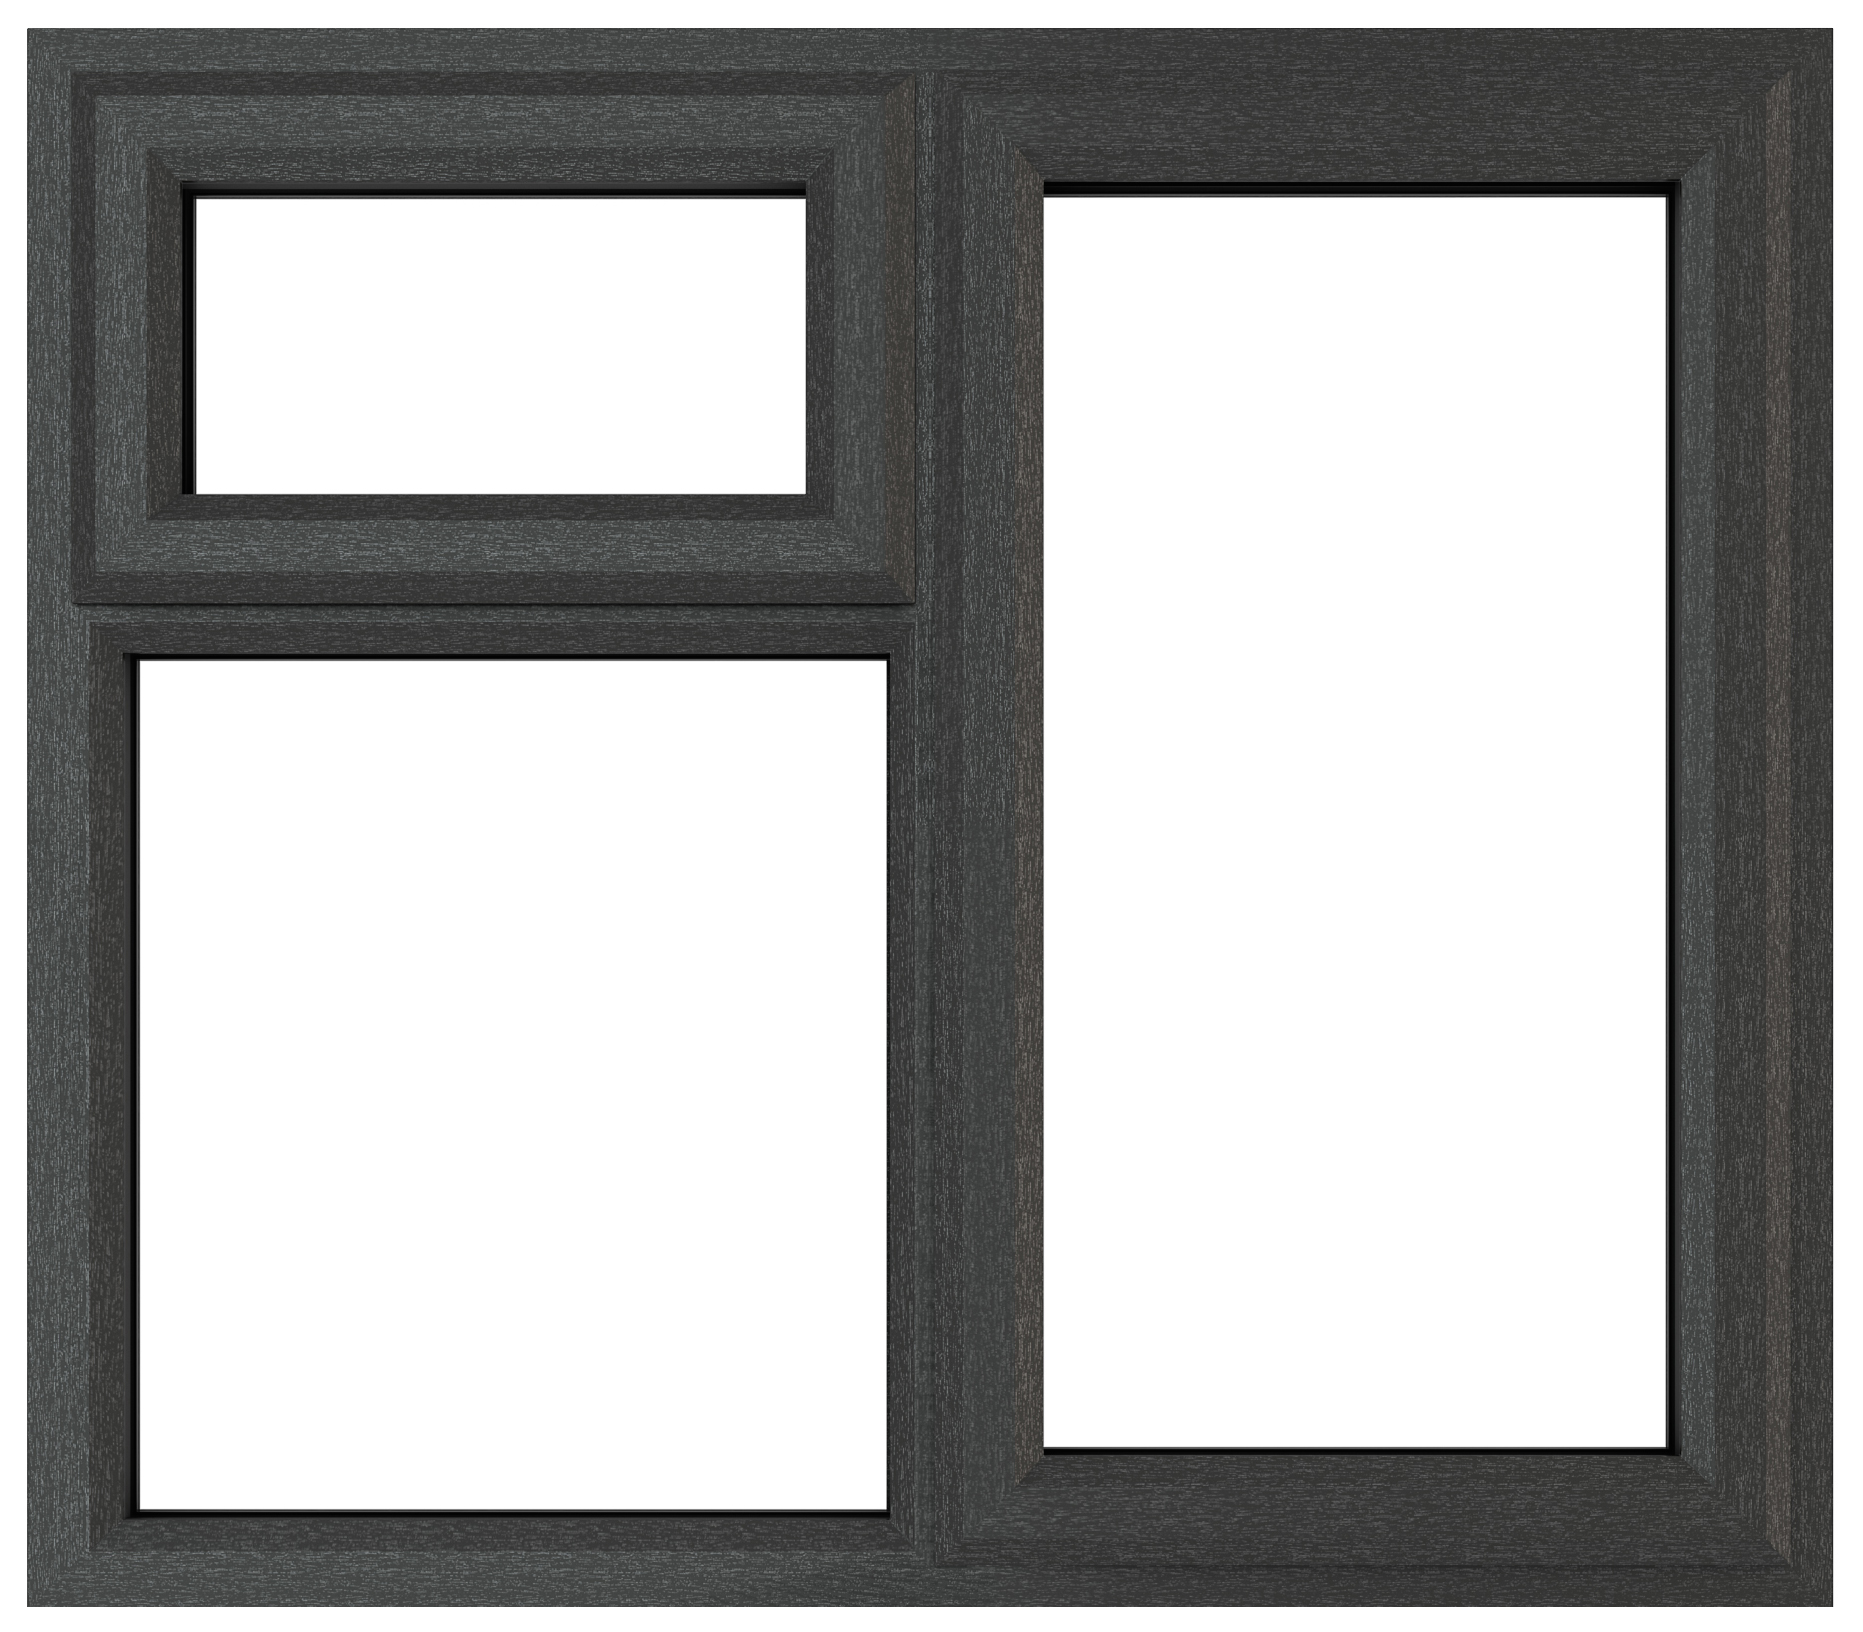 Crystal uPVC Grey / White Right Hung Top Opener Clear Triple Glazed Window - 905 x 965mm